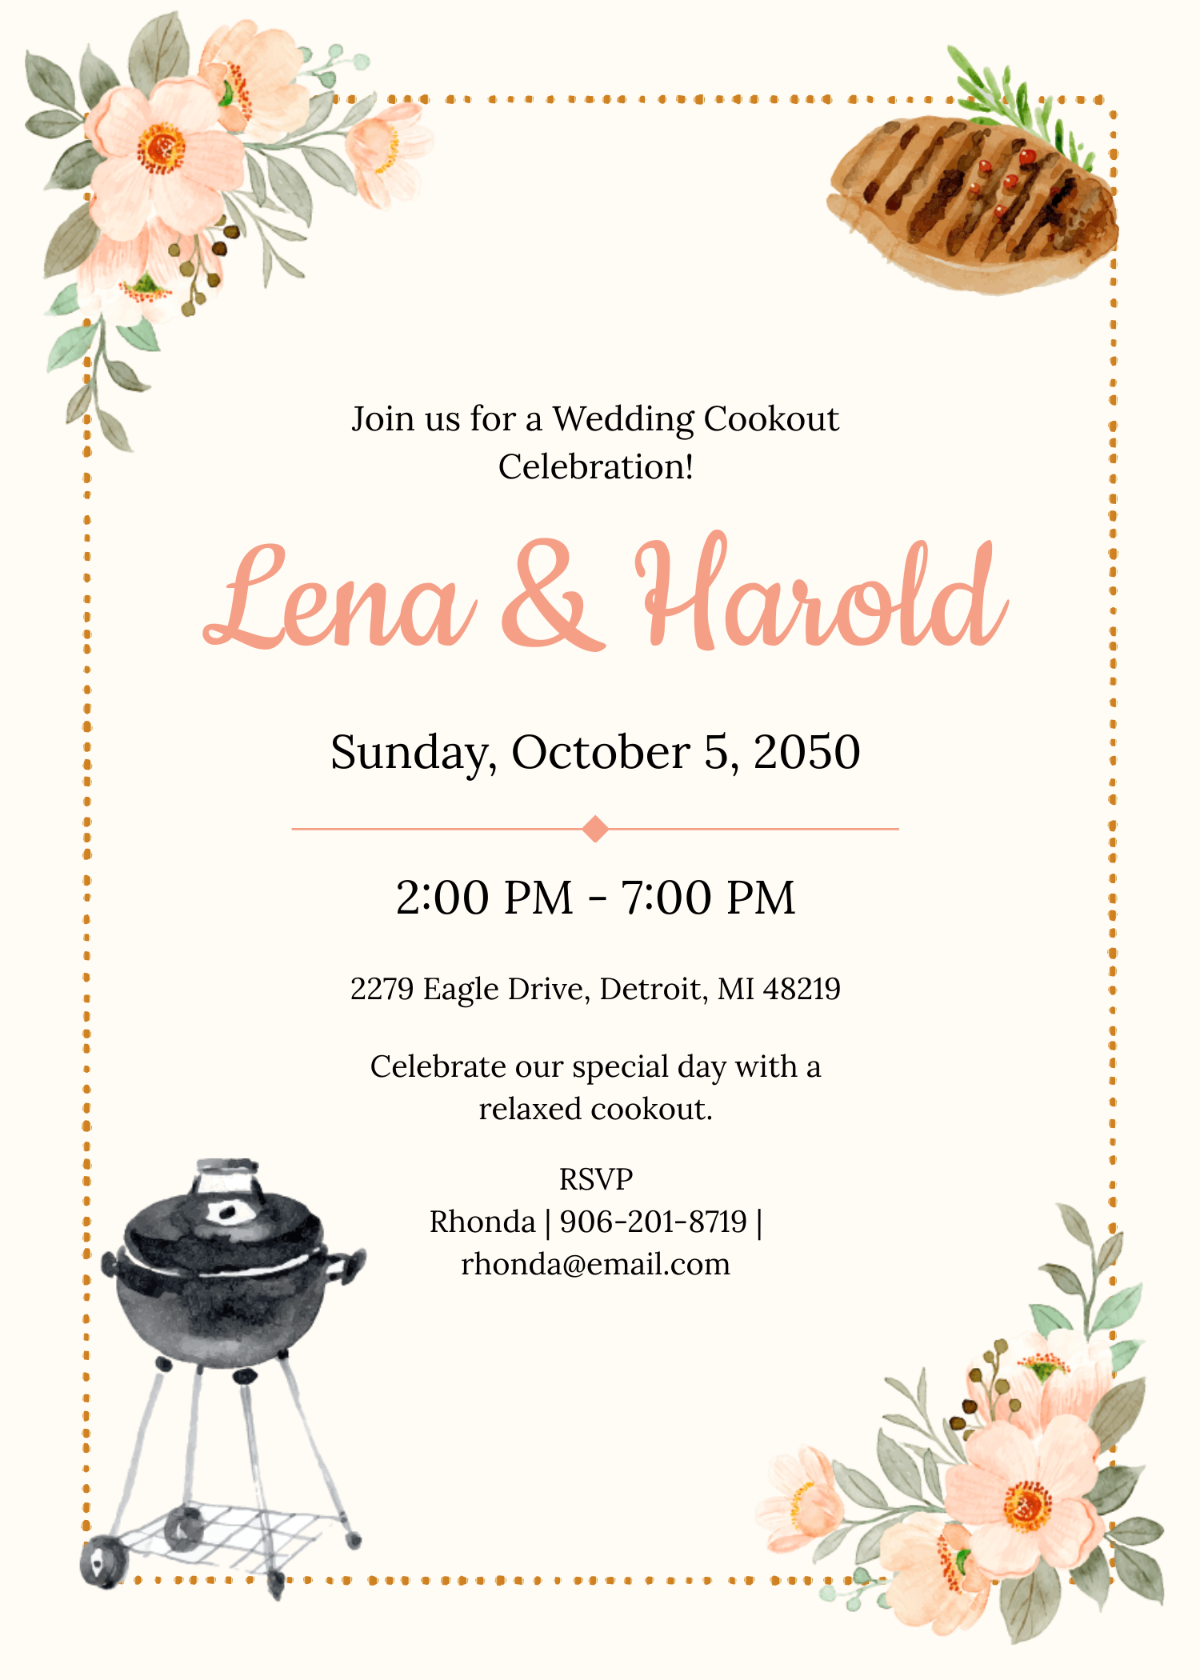 Wedding Cookout Invitation